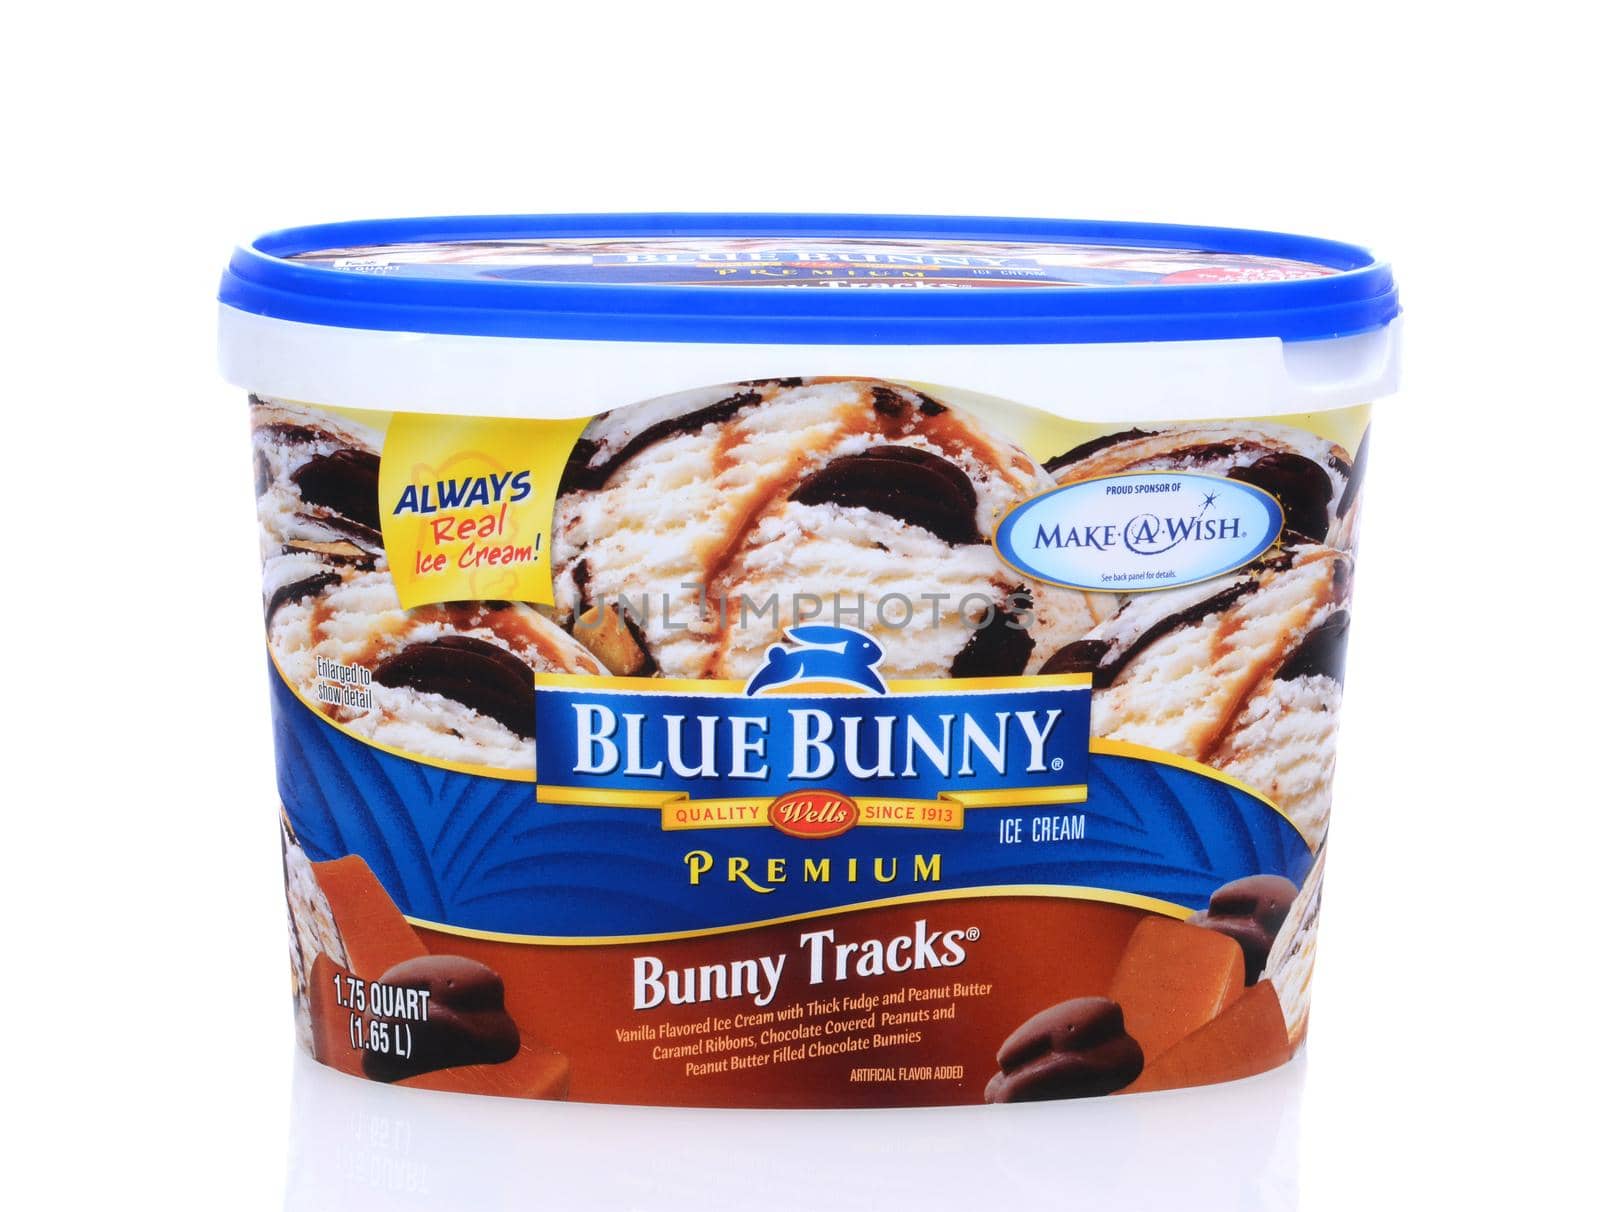 IRVINE, CA - May 14, 2014: A 1.75 quart carton of Blue Bunny Bunny Tracks Ice Cream. From Wells Enterprises, Inc. is the largest family-owned ice cream manufacturer in the United States